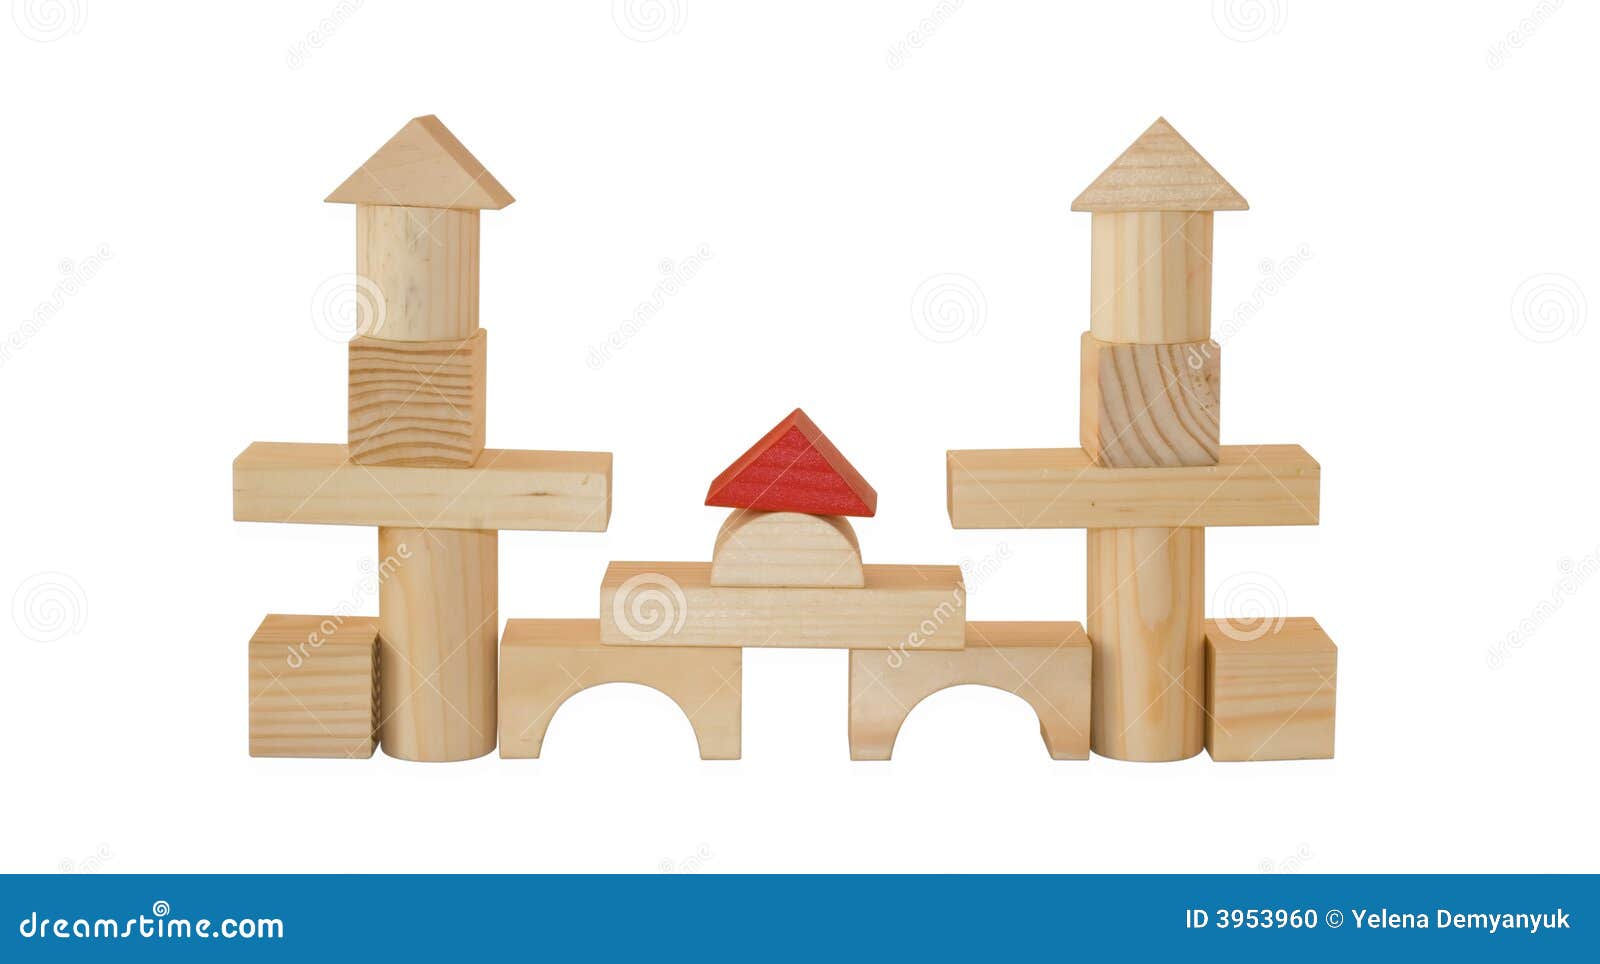 Castle Made By Wooden Blocks Stock Photo - Image of ...